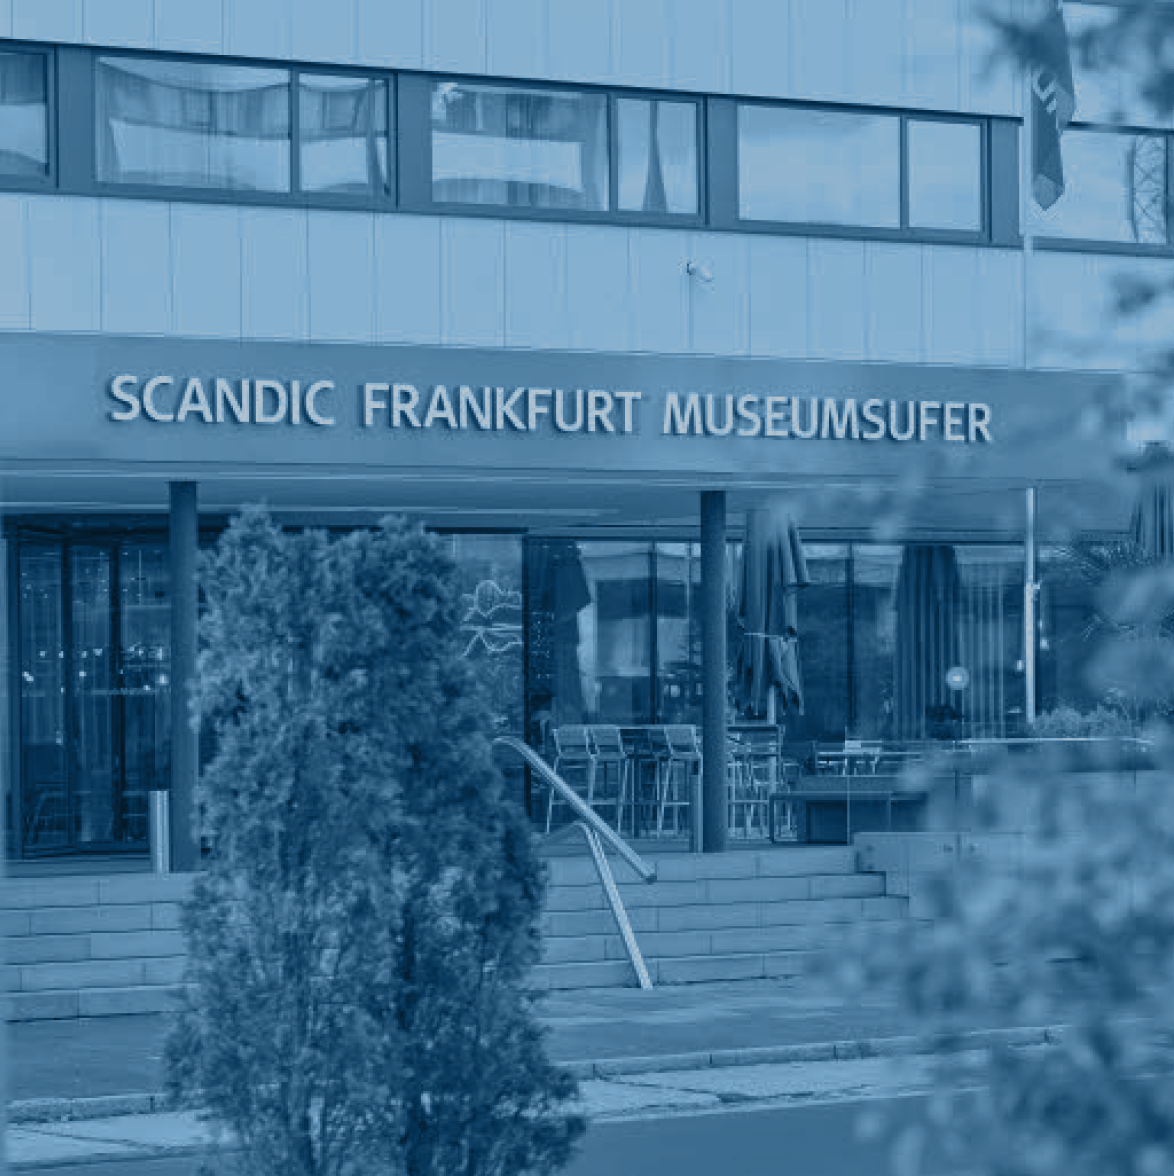 Exterior view of the front of the Scandic Frankfurt Museumsufer